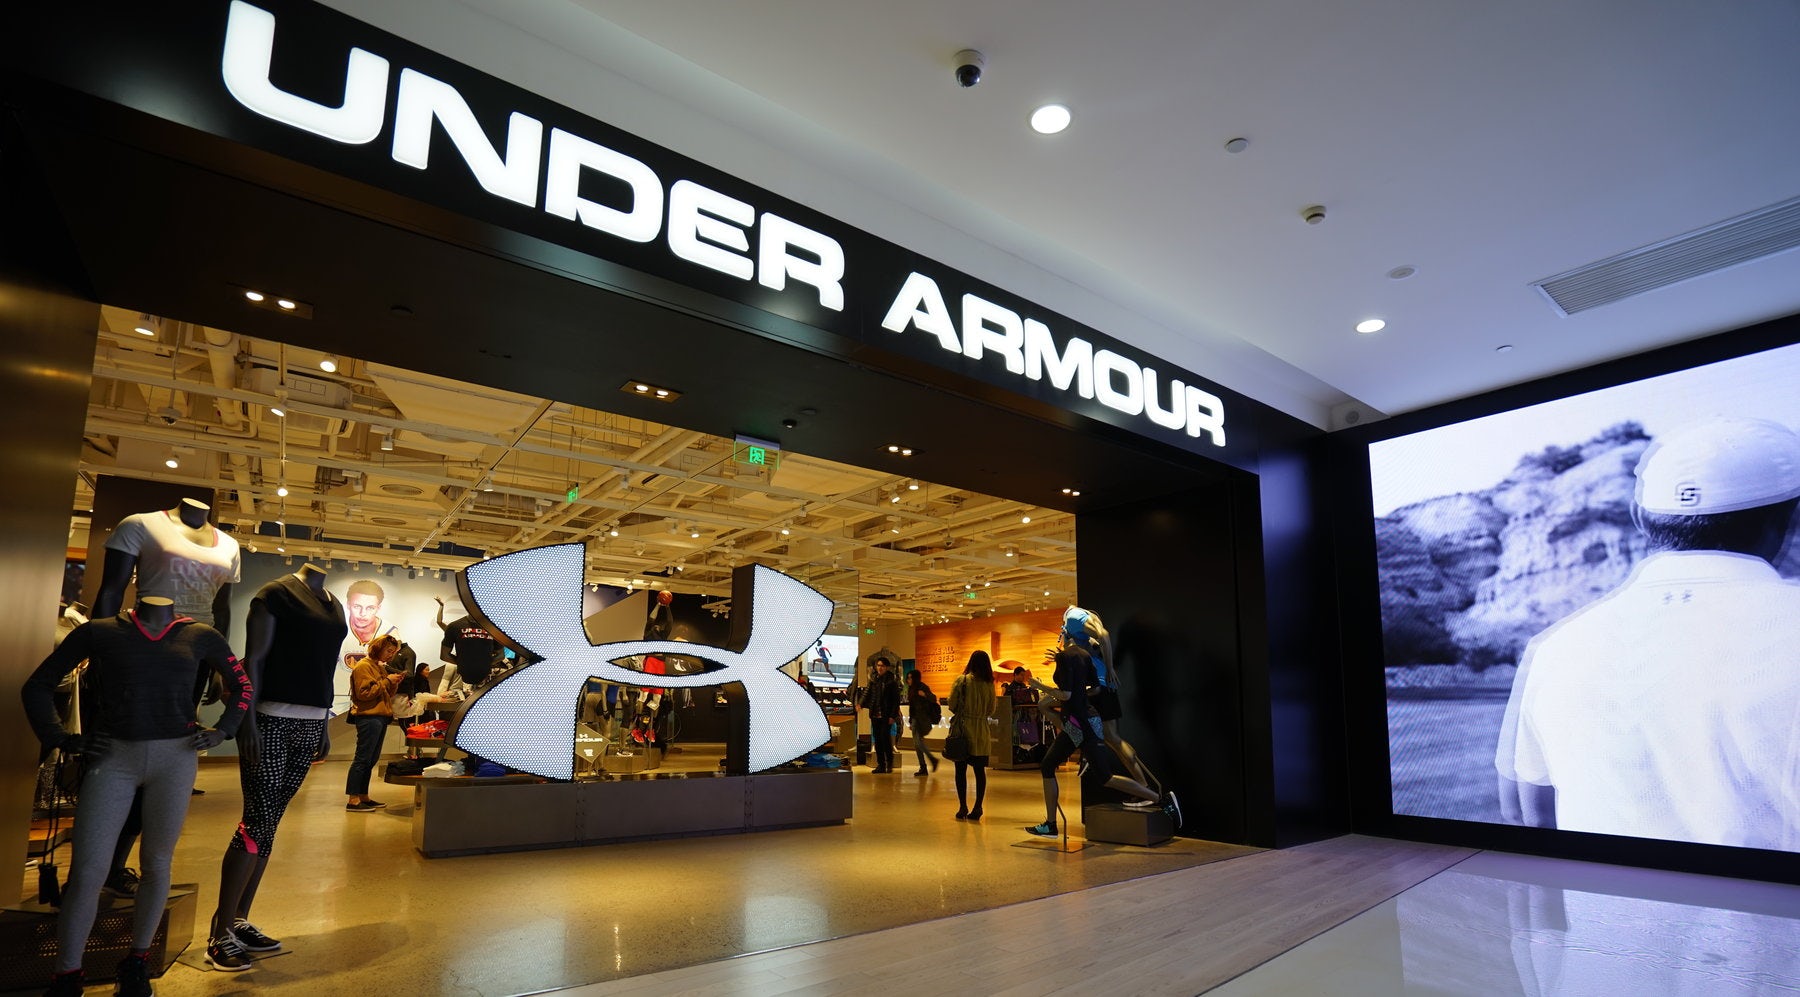 under armour store